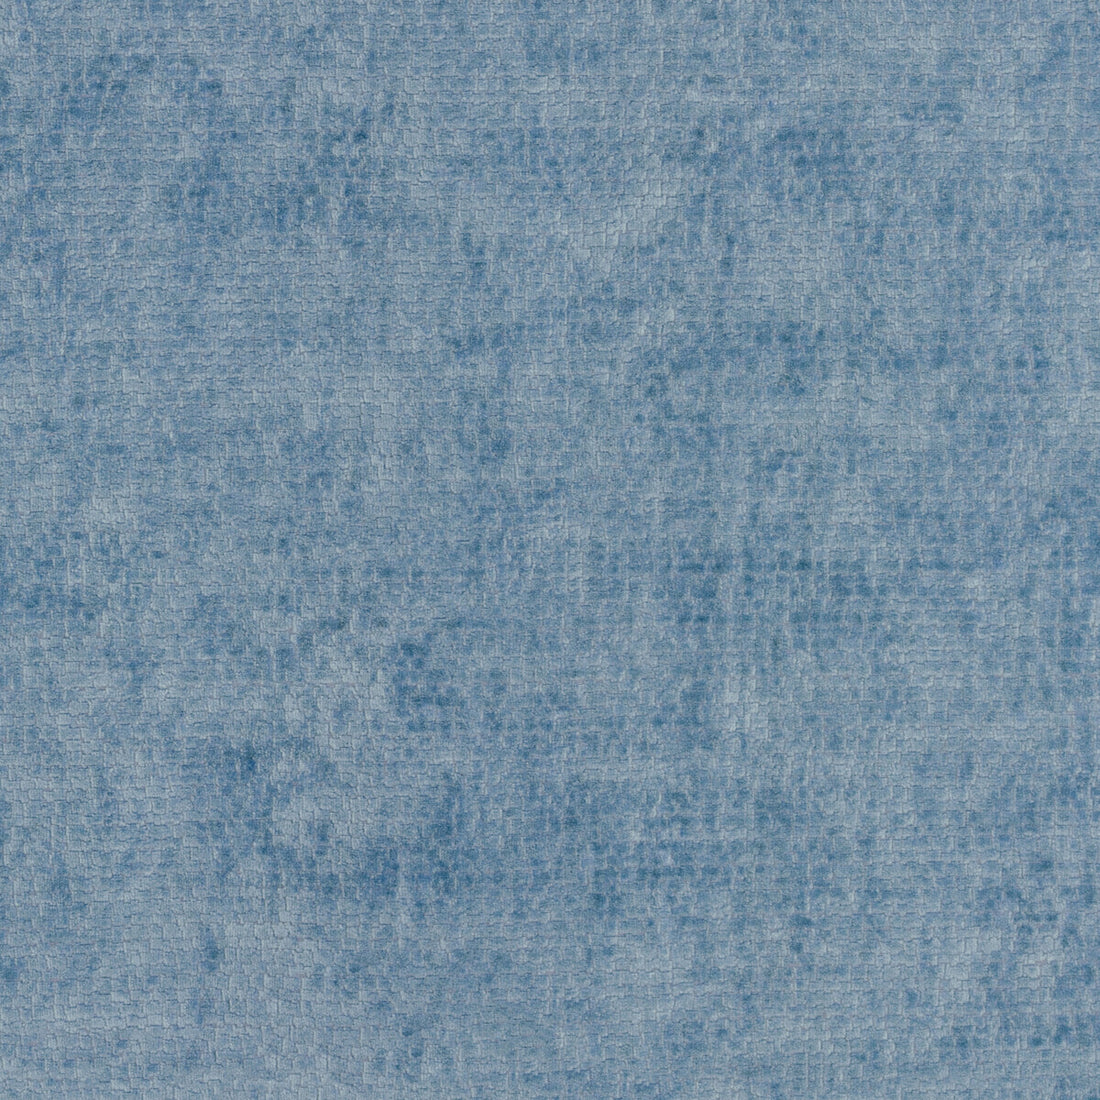 Rebus fabric in blue color - pattern GWF-3766.50.0 - by Lee Jofa Modern in the Kelly Wearstler VI collection